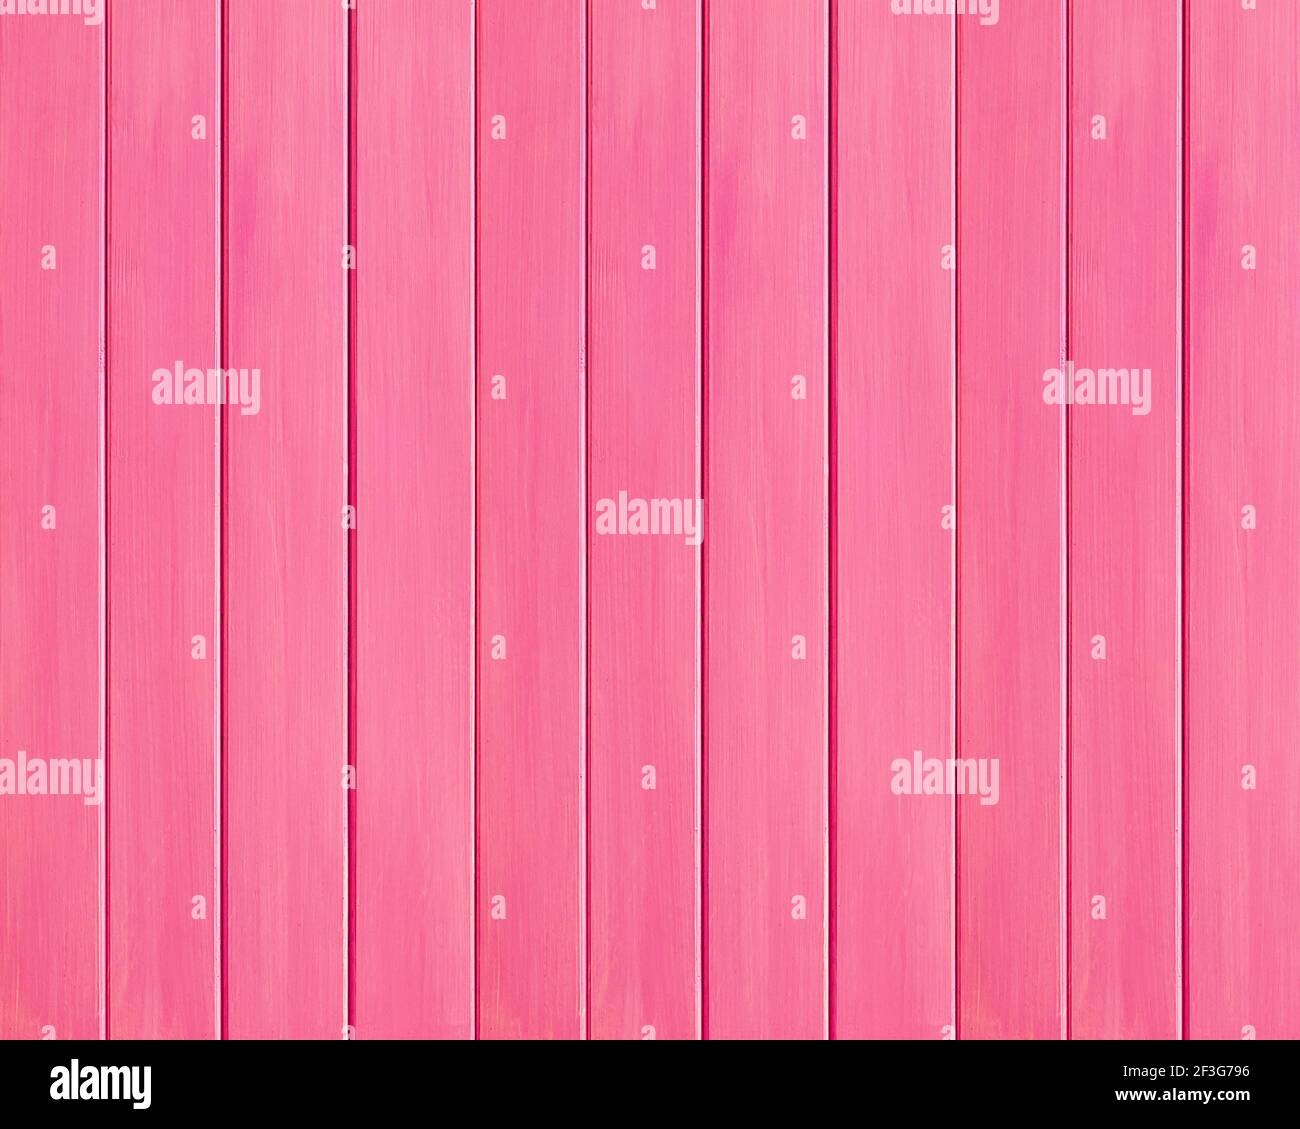 Pink colored wood plank background Stock Photo